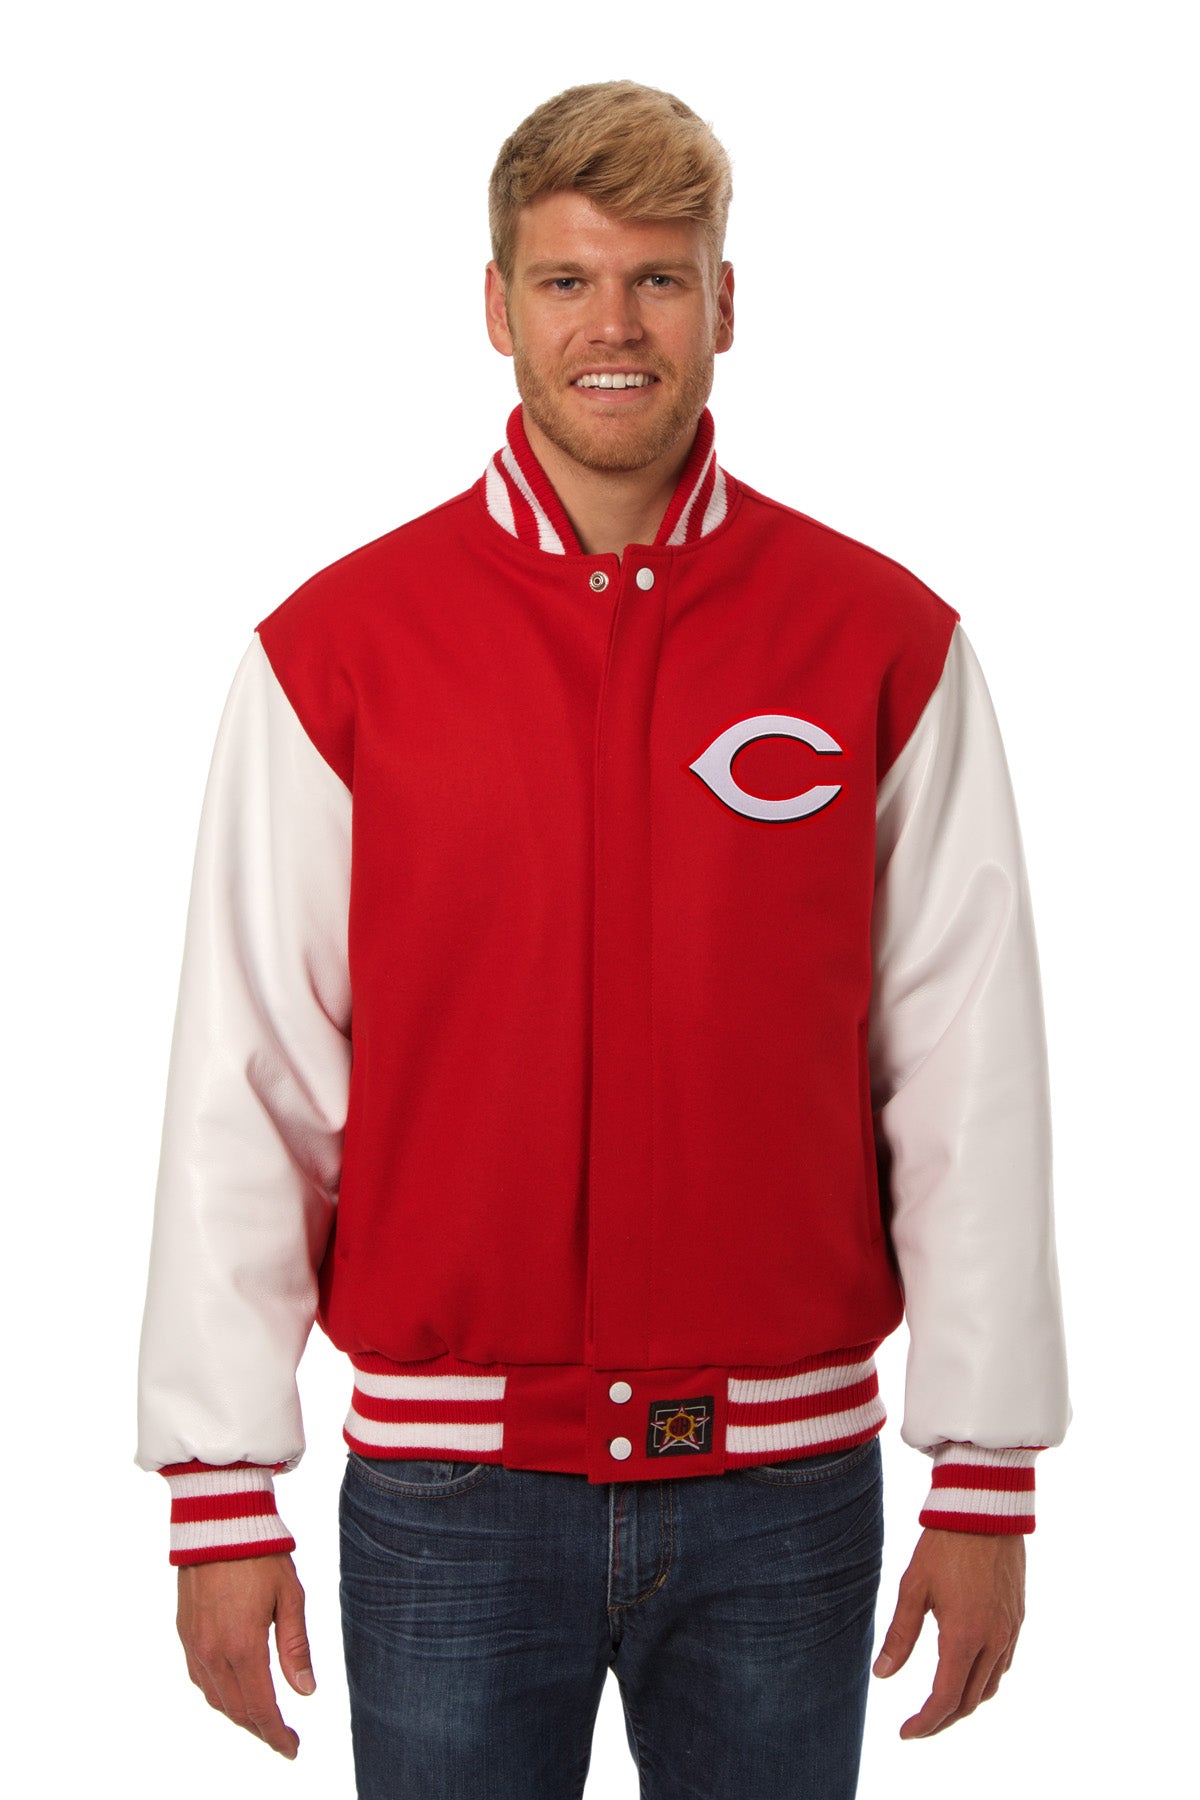 Cincinnati Reds Embroidered Wool and Leather Jacket